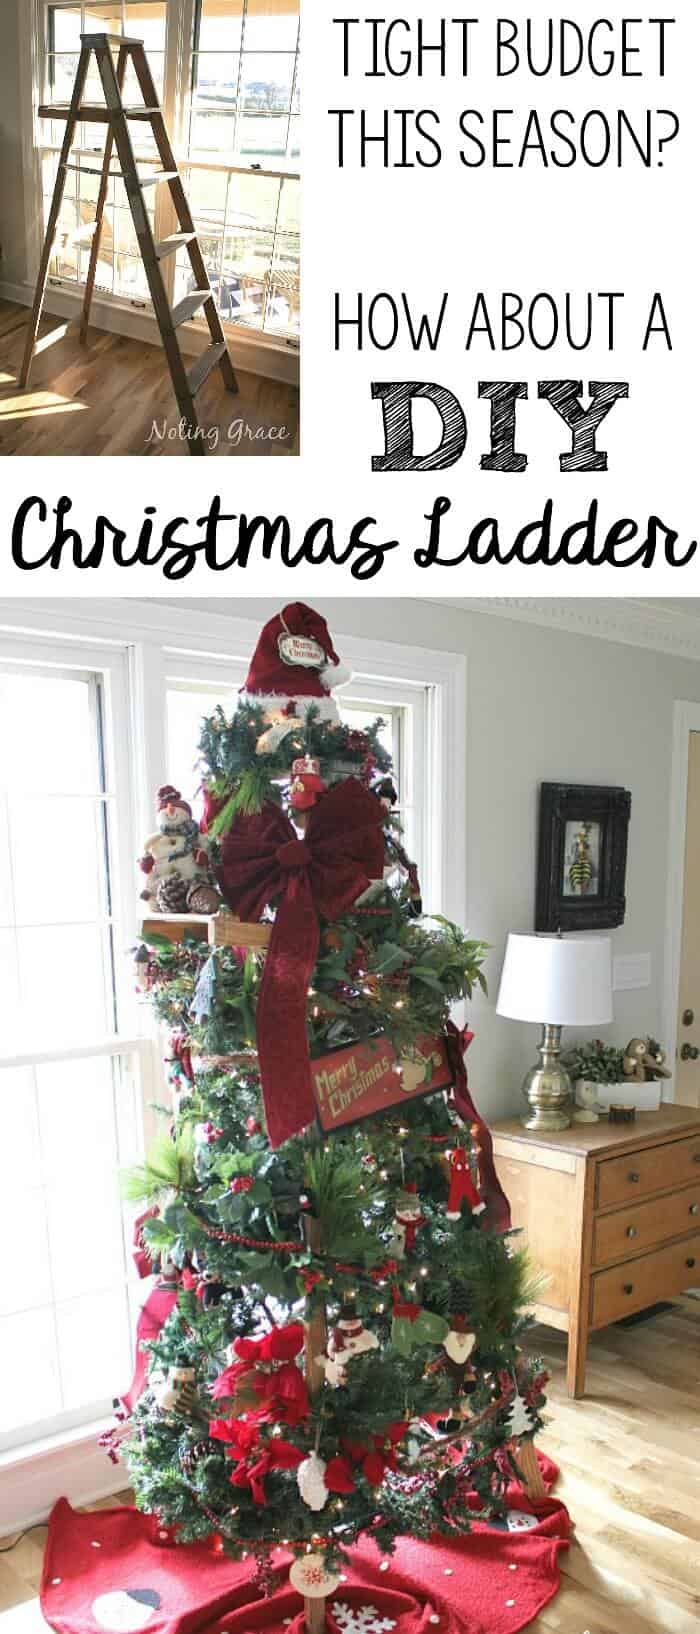 Tight budget this holiday season? How about a DIY Christmas Tree Ladder? When we didn't have a budget left for a tree, I had to get creative. This was my solution!